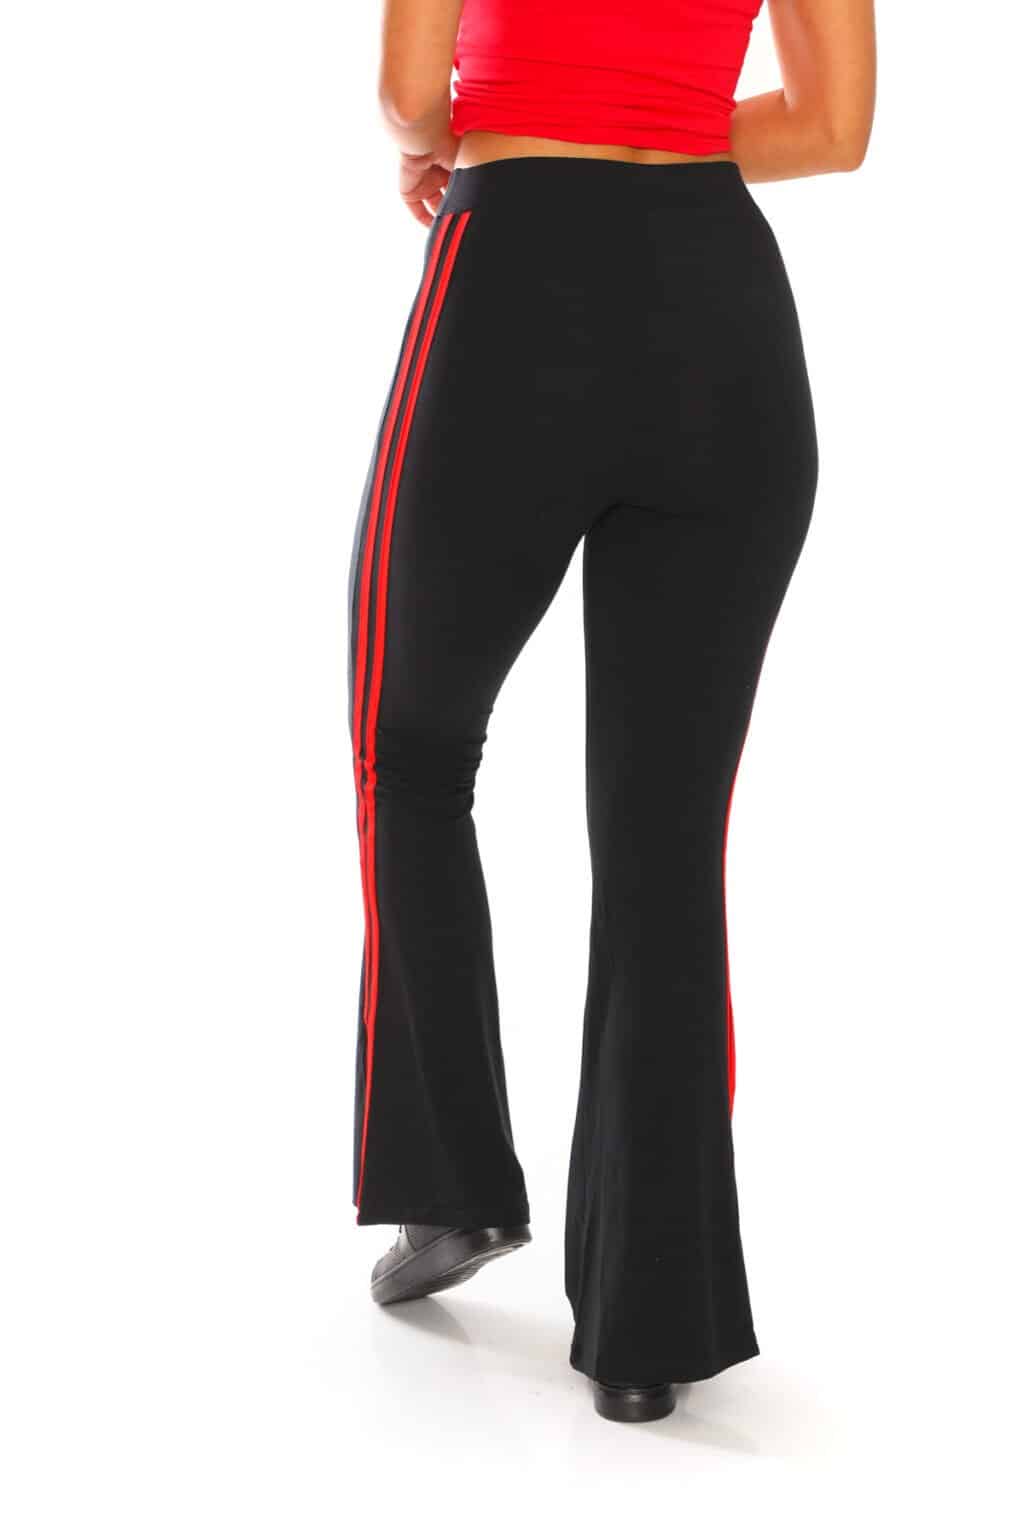 Yummy Material Flare Pants Solid Black with Red Stripes - 4